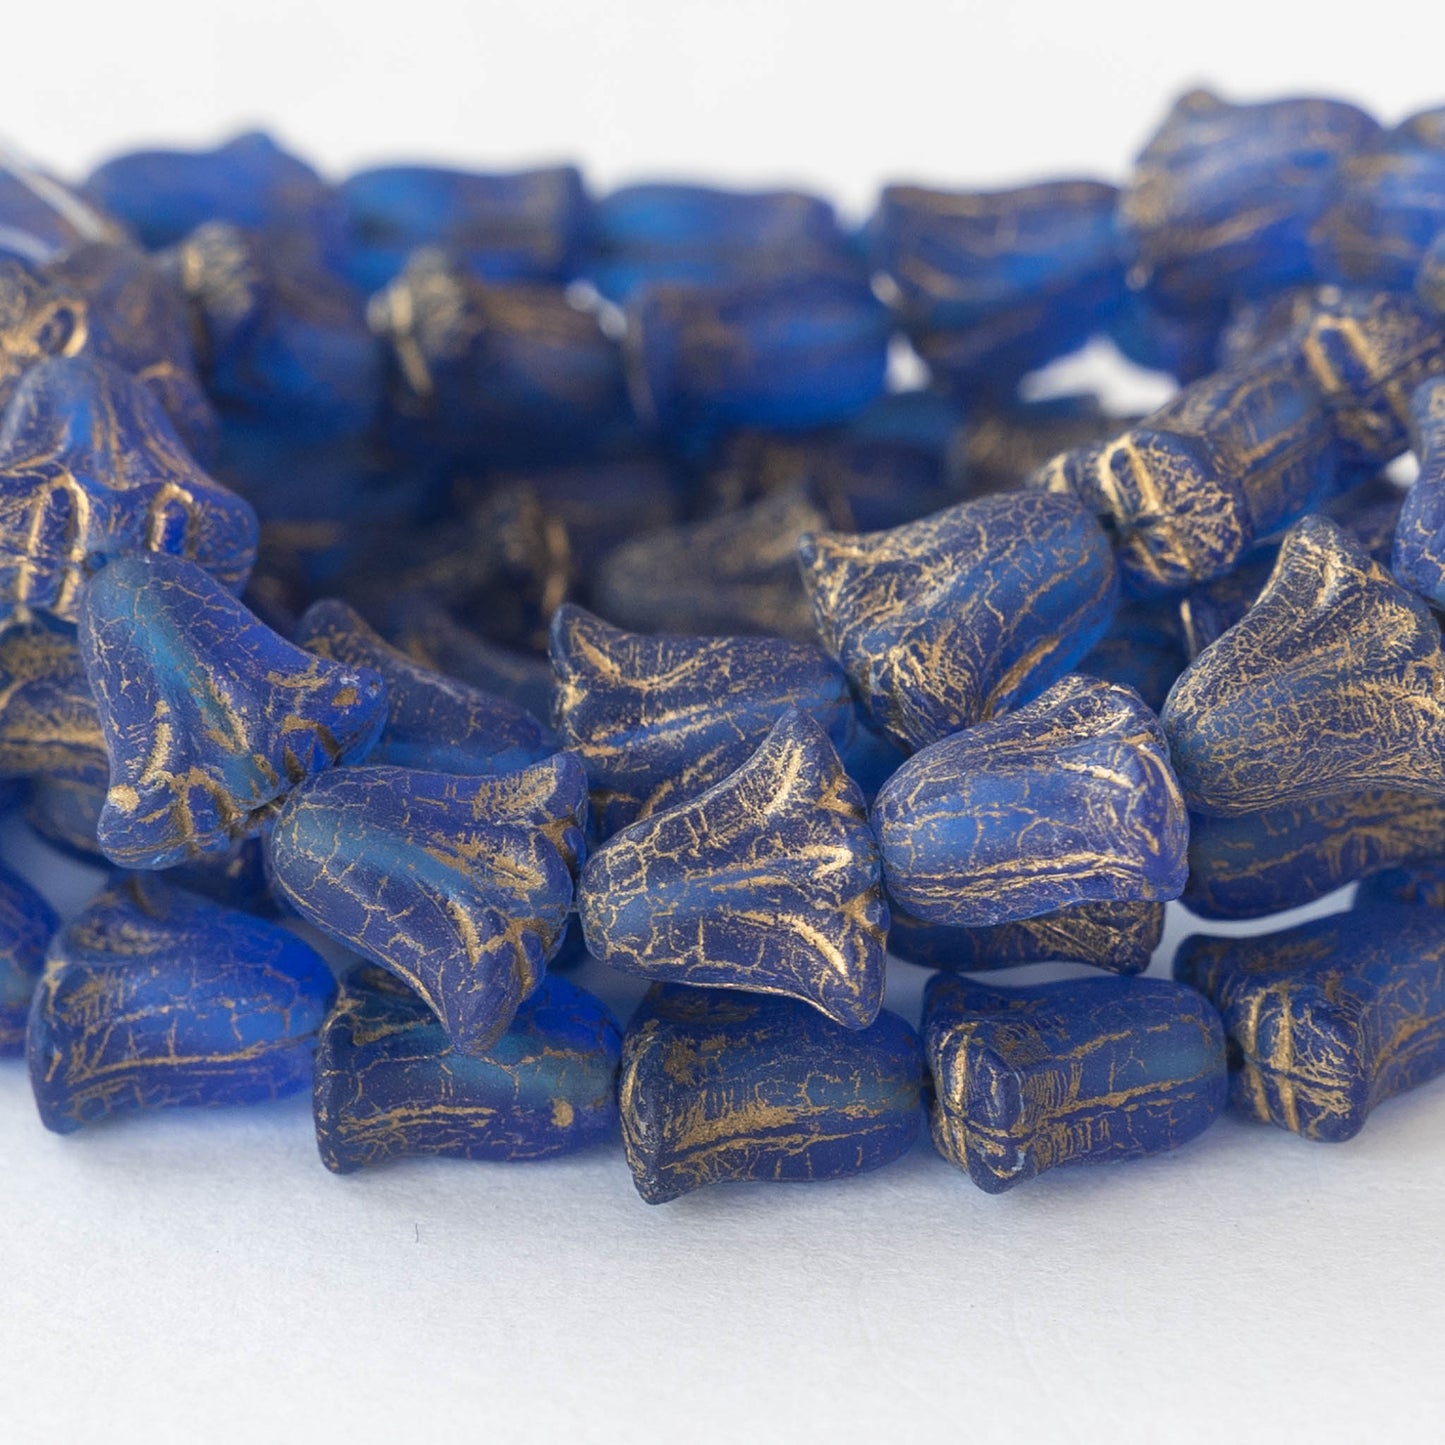 9x10mm Lily / Tulip Flower Beads - Azure Blue Matte with Gold Wash - 15 Beads